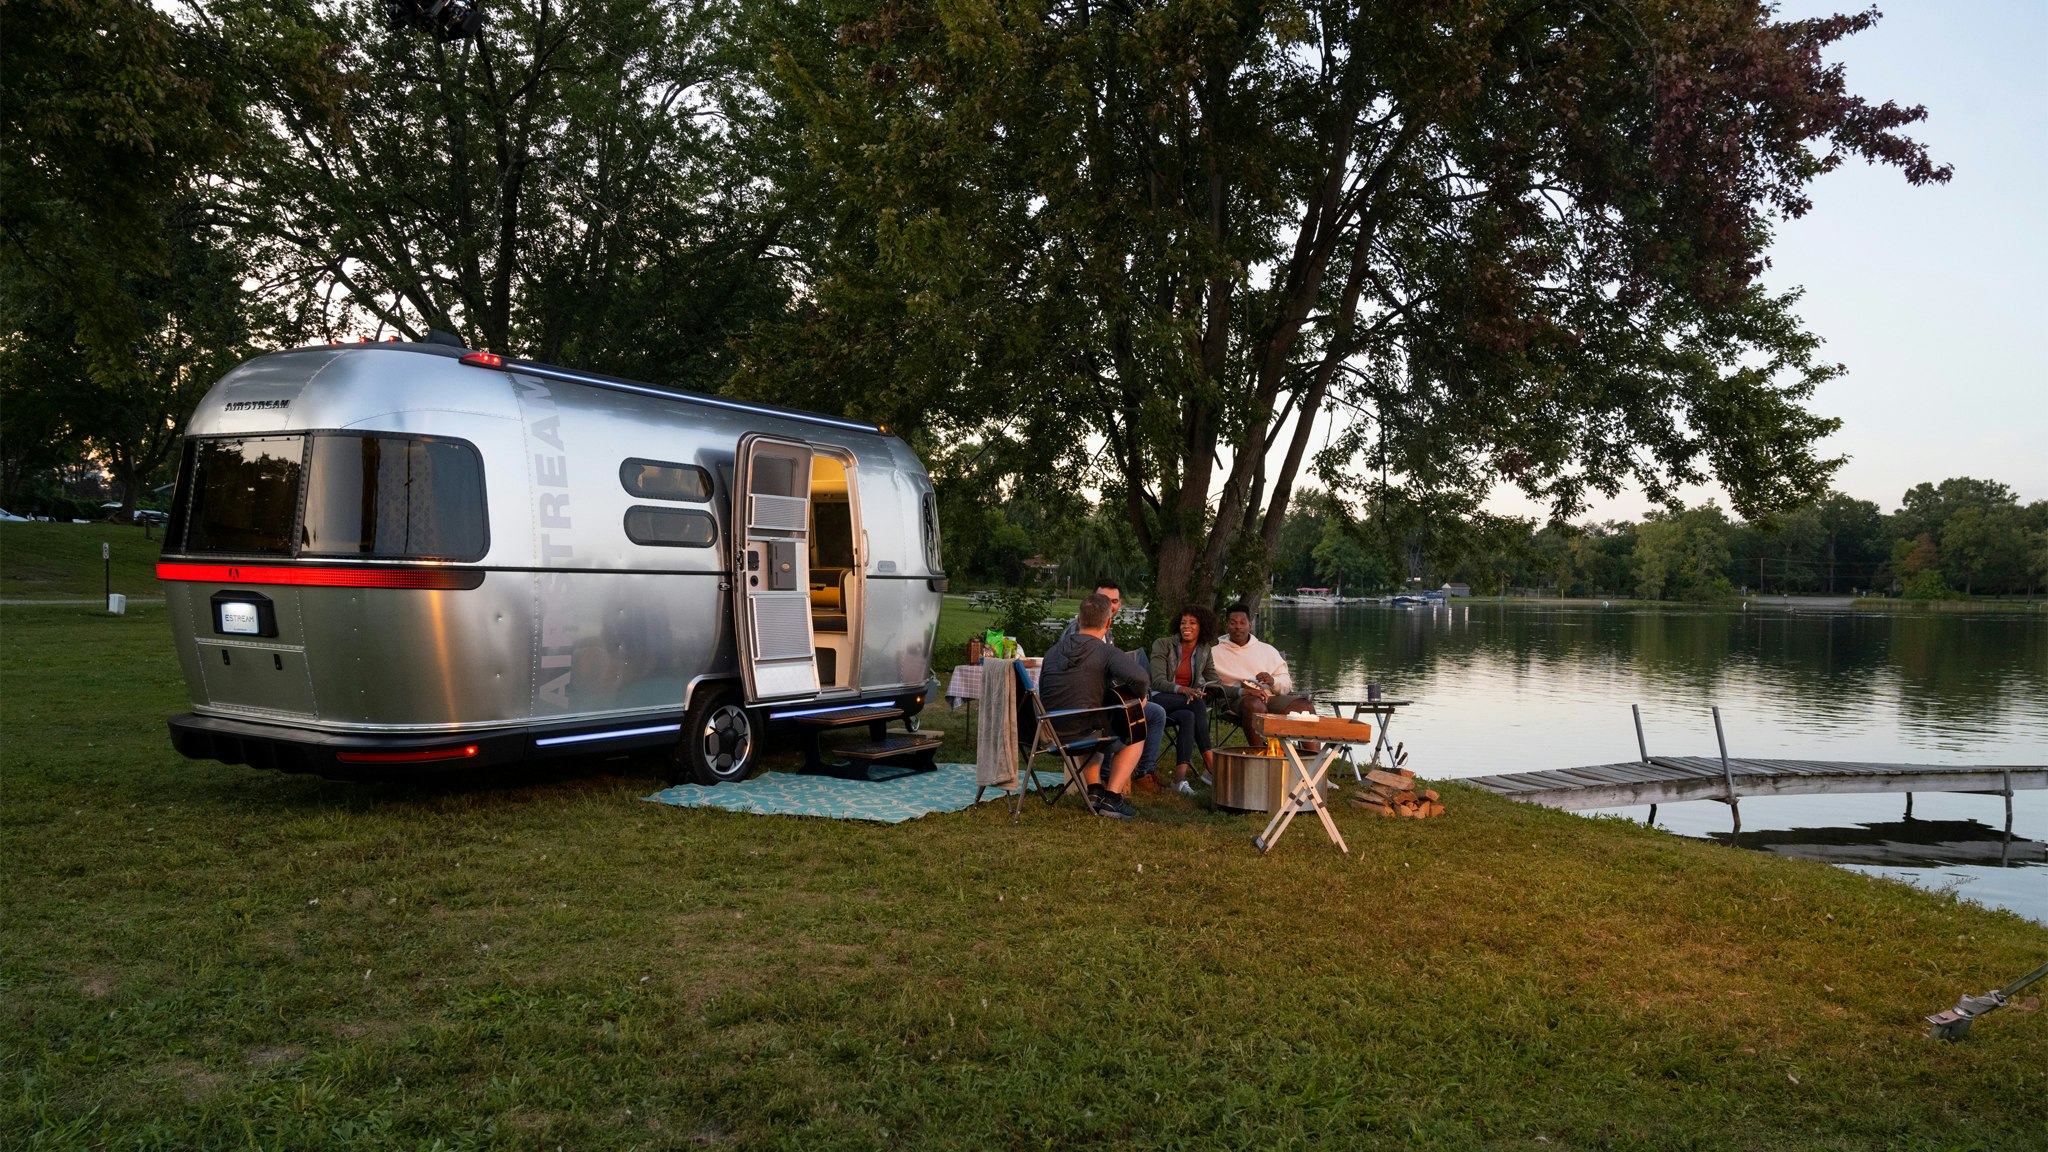 People sitting around a fire and by a lake and the Airstream all-electric Airstream travel trailer that is a concept vehicle.